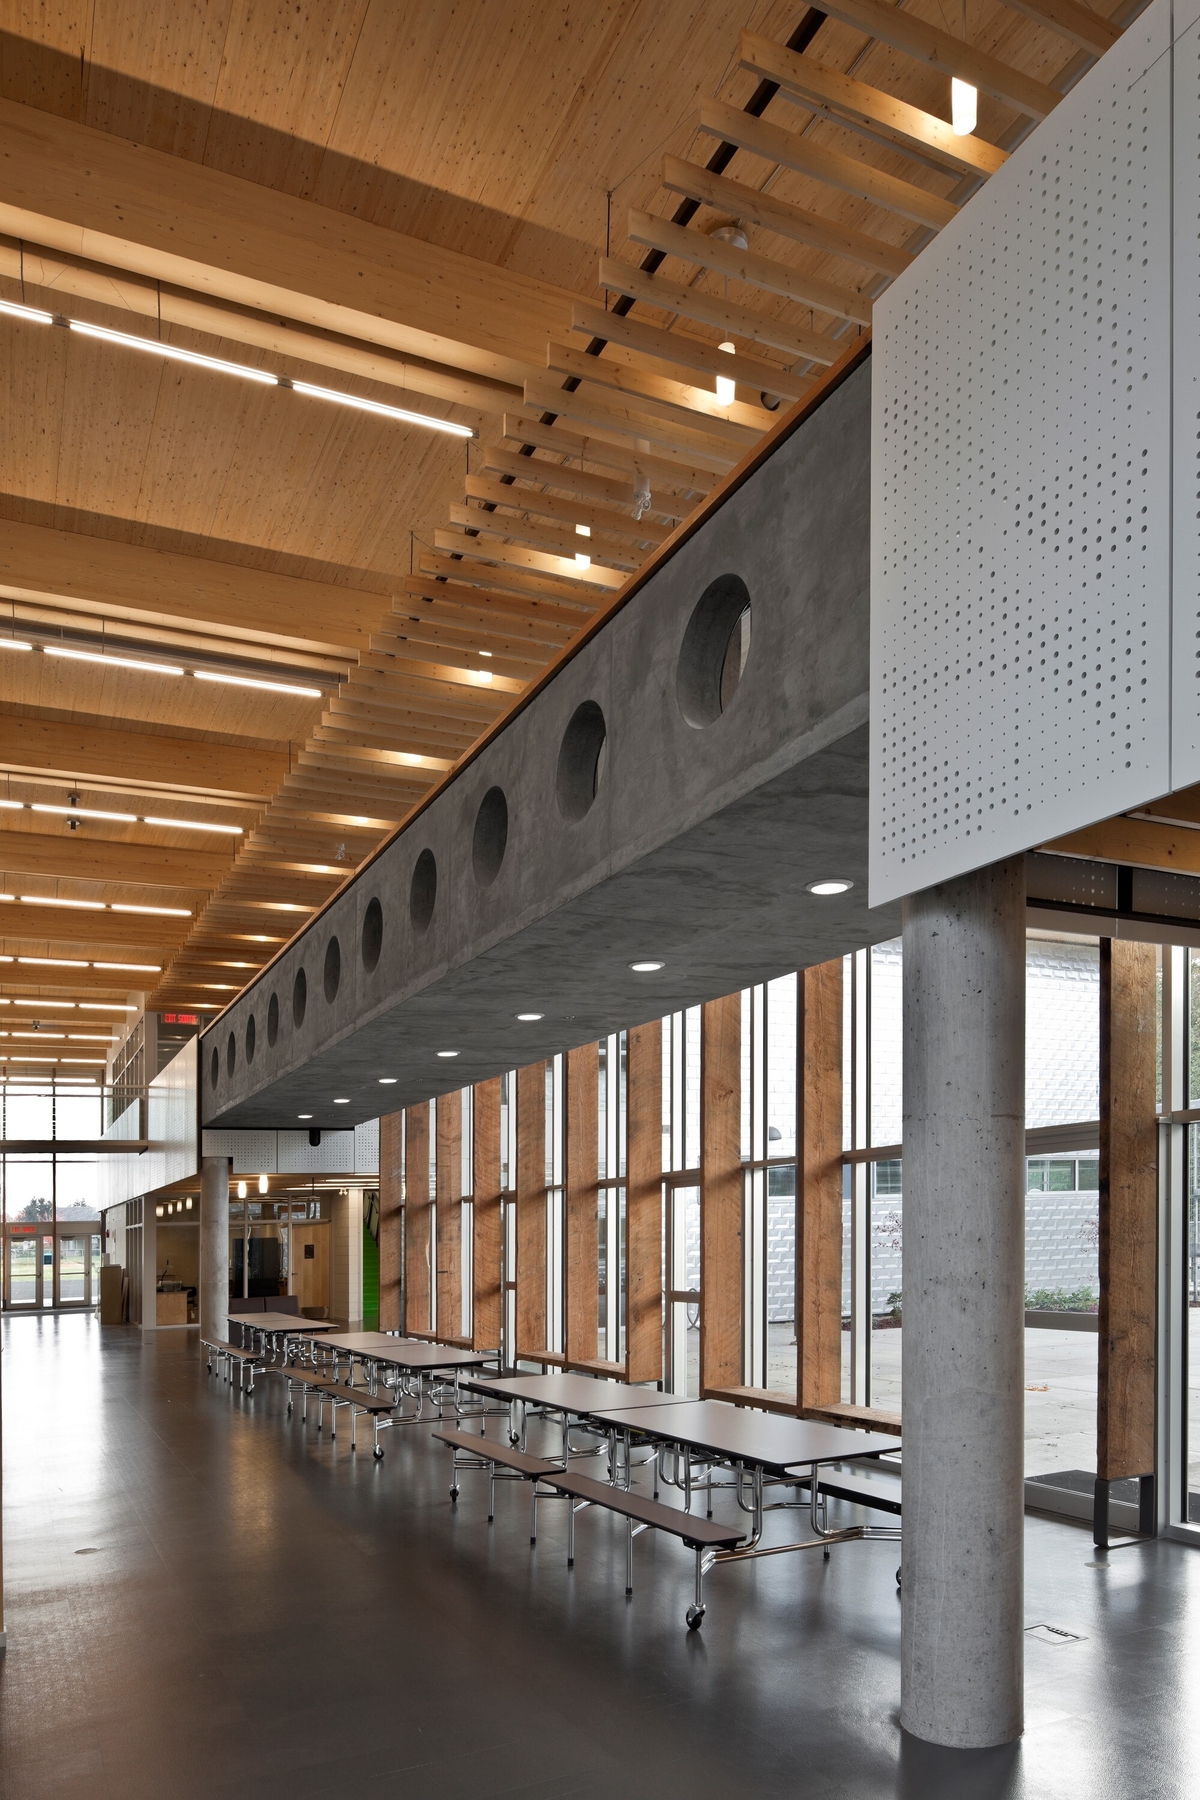 Interior daytime view of low rise École Au-cœur-de-l’île elementary school two storey main entrance hall and office, showing exposed Douglas-fir timbers, glue-laminated timber (glulam) roof beams, 2nd floor concrete walkway, and extensive wood accents